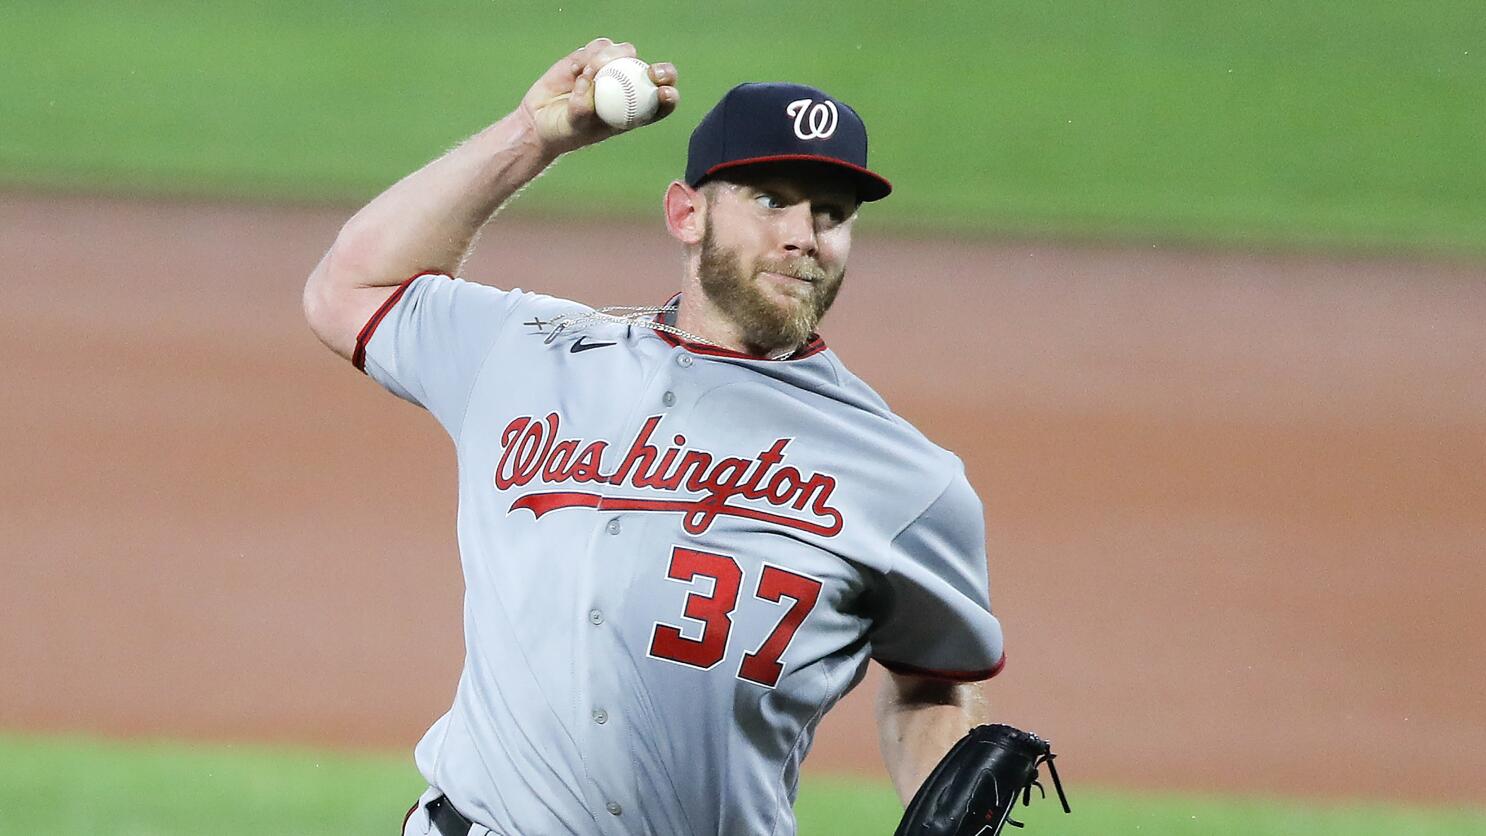 MLB notes: Nationals ace Stephen Strasburg is done for season